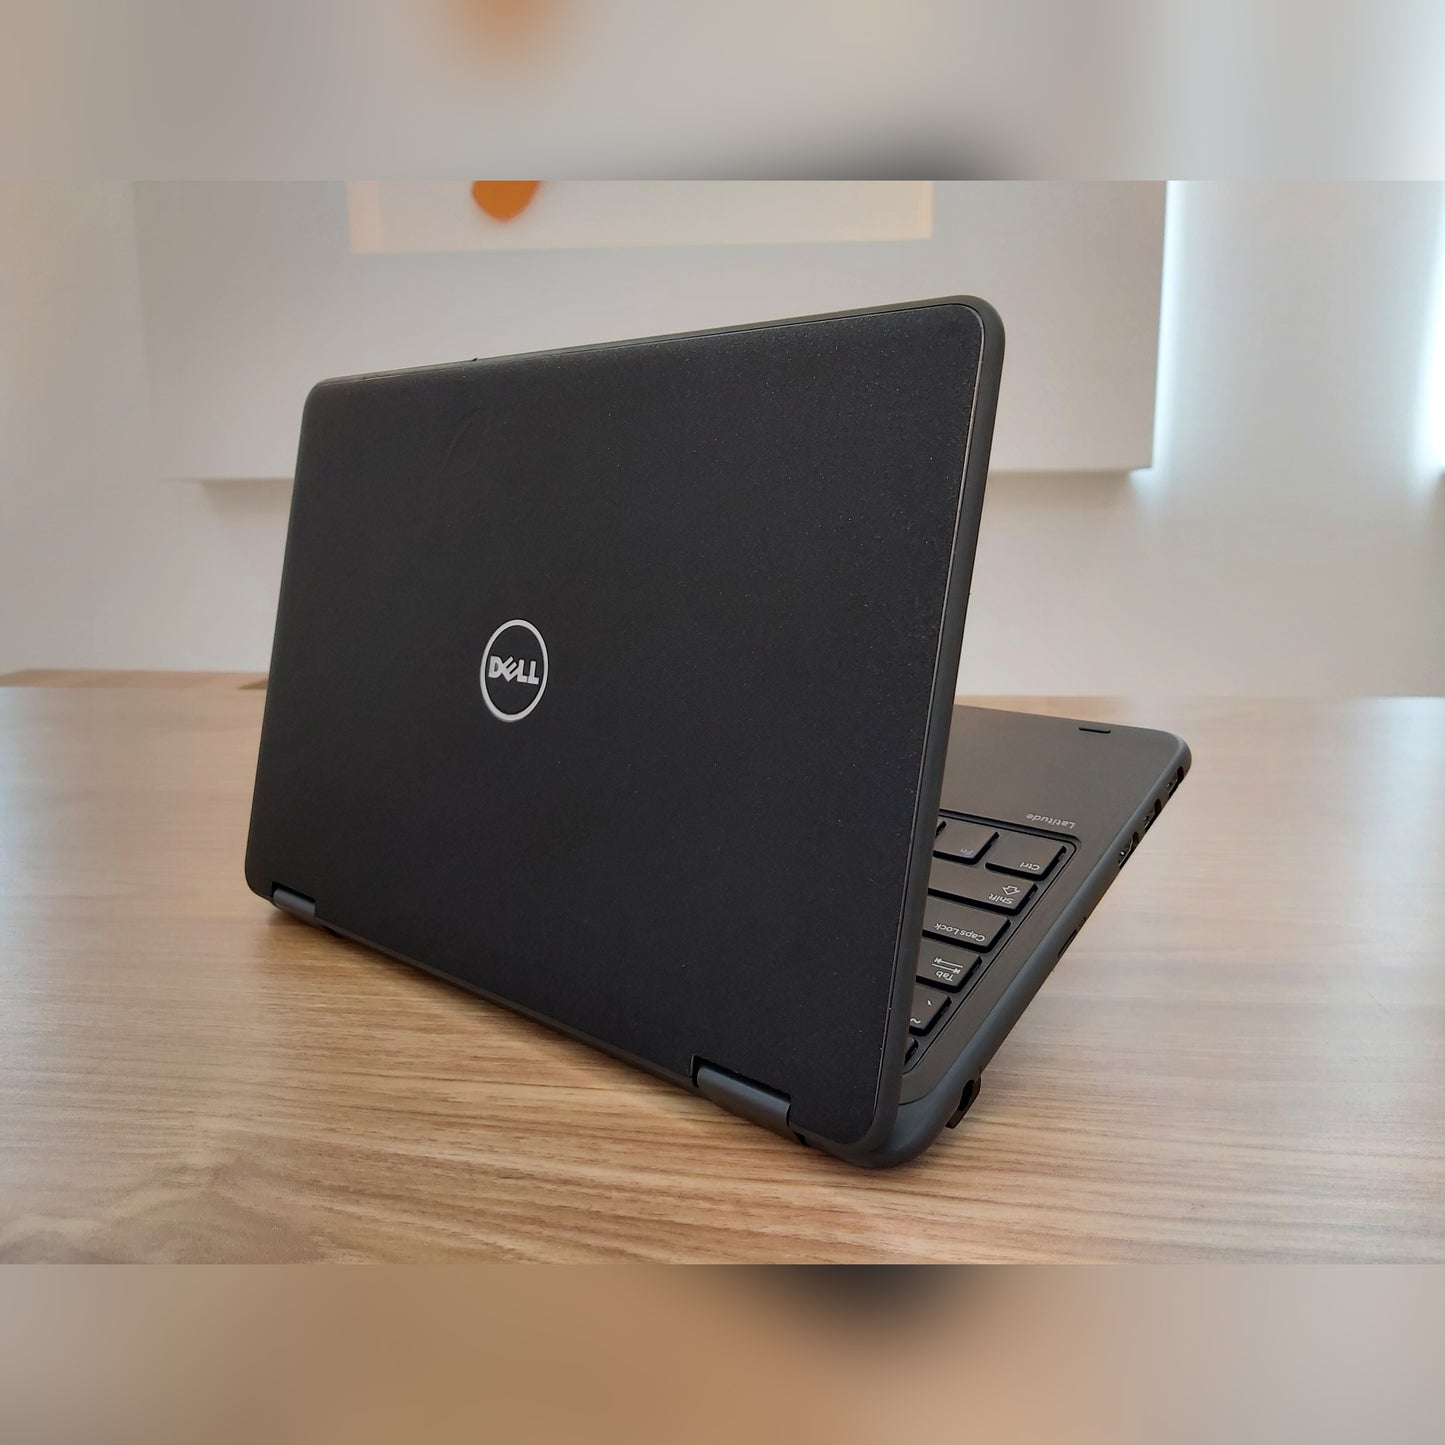 Dell 2in1 Latitude 3189 Laptop (Slightly Used)